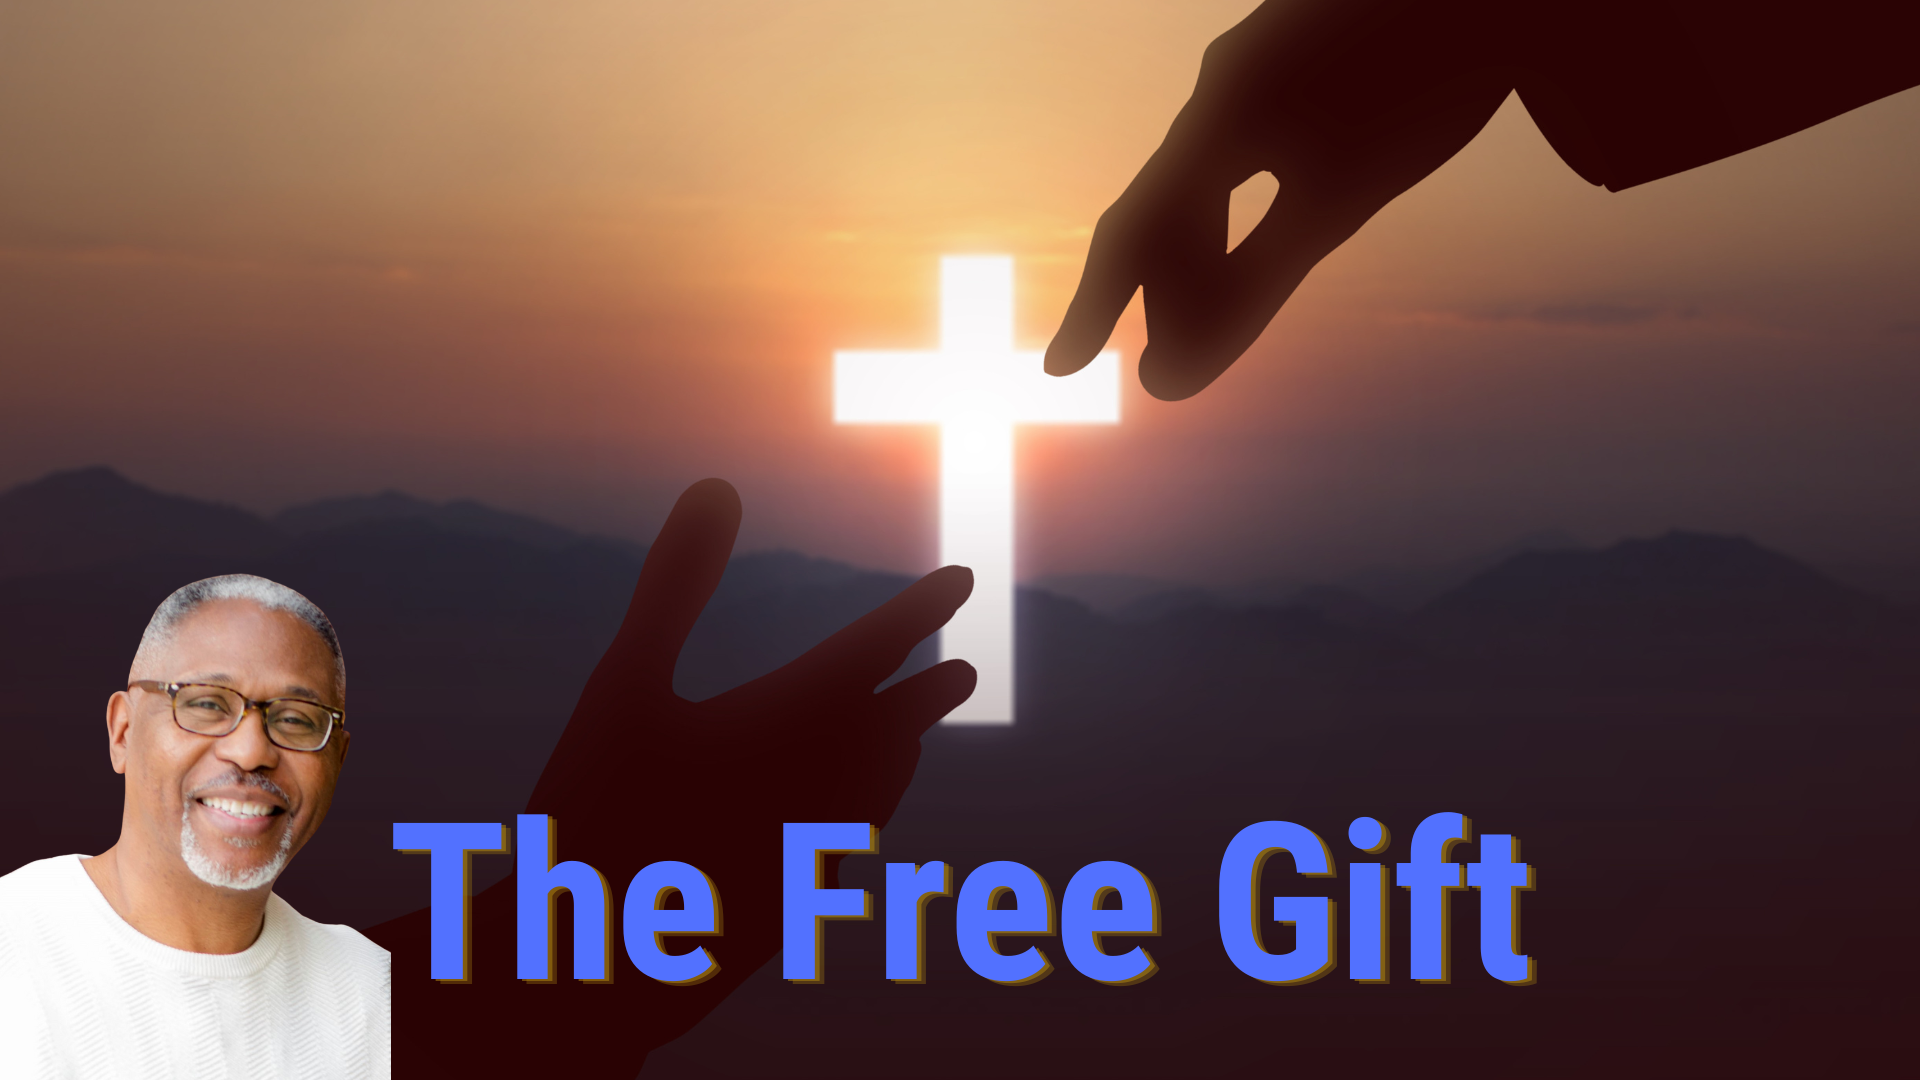 The Free Gift head image